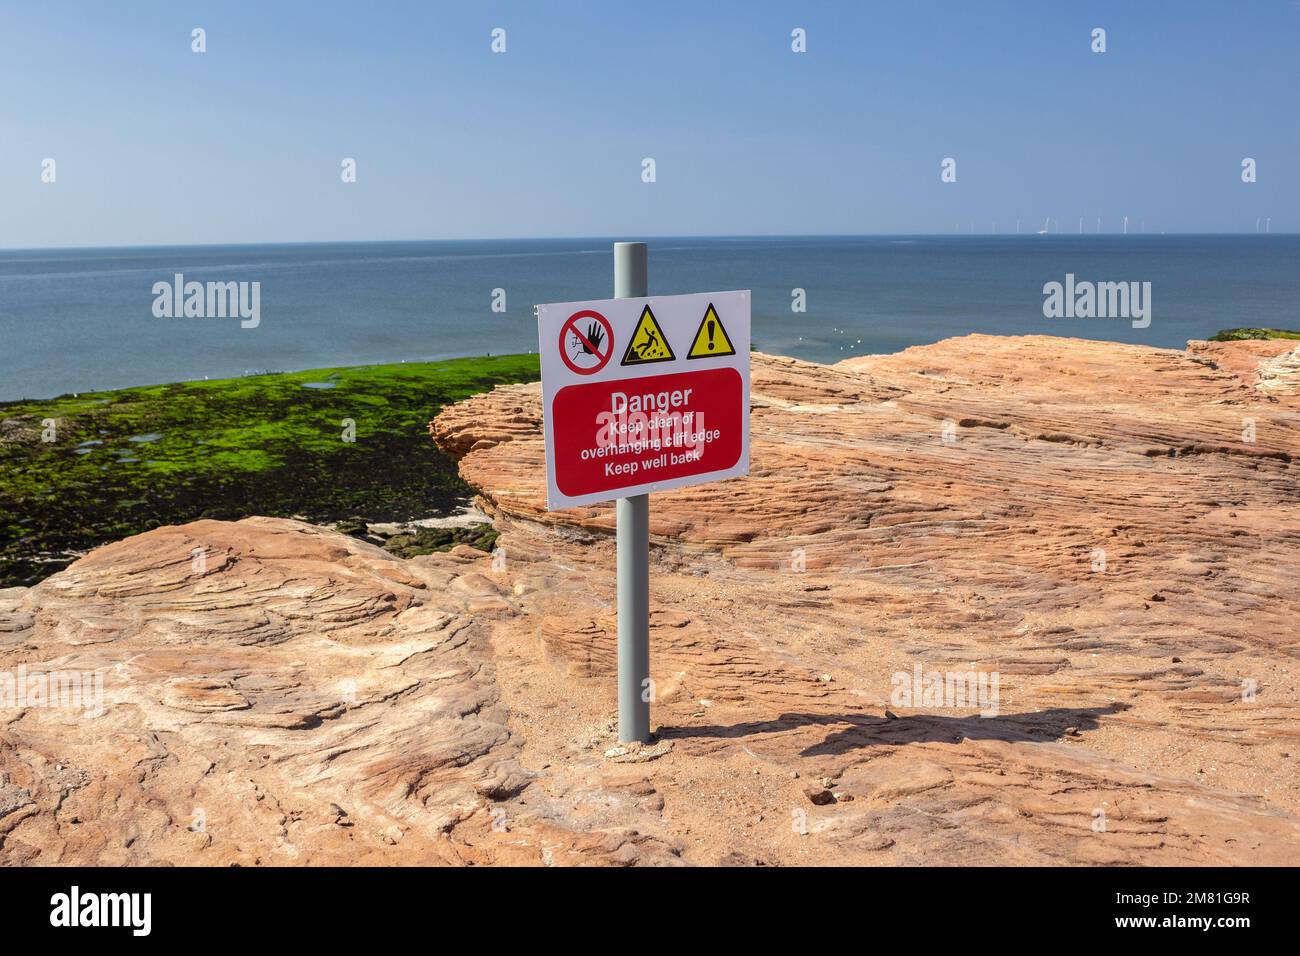 Hilbre Island, UK: Warning sign on rocky ledge with the Dee estuary below. Danger - Keep clear of overhanging cliff edge, Keep well back Stock Photo